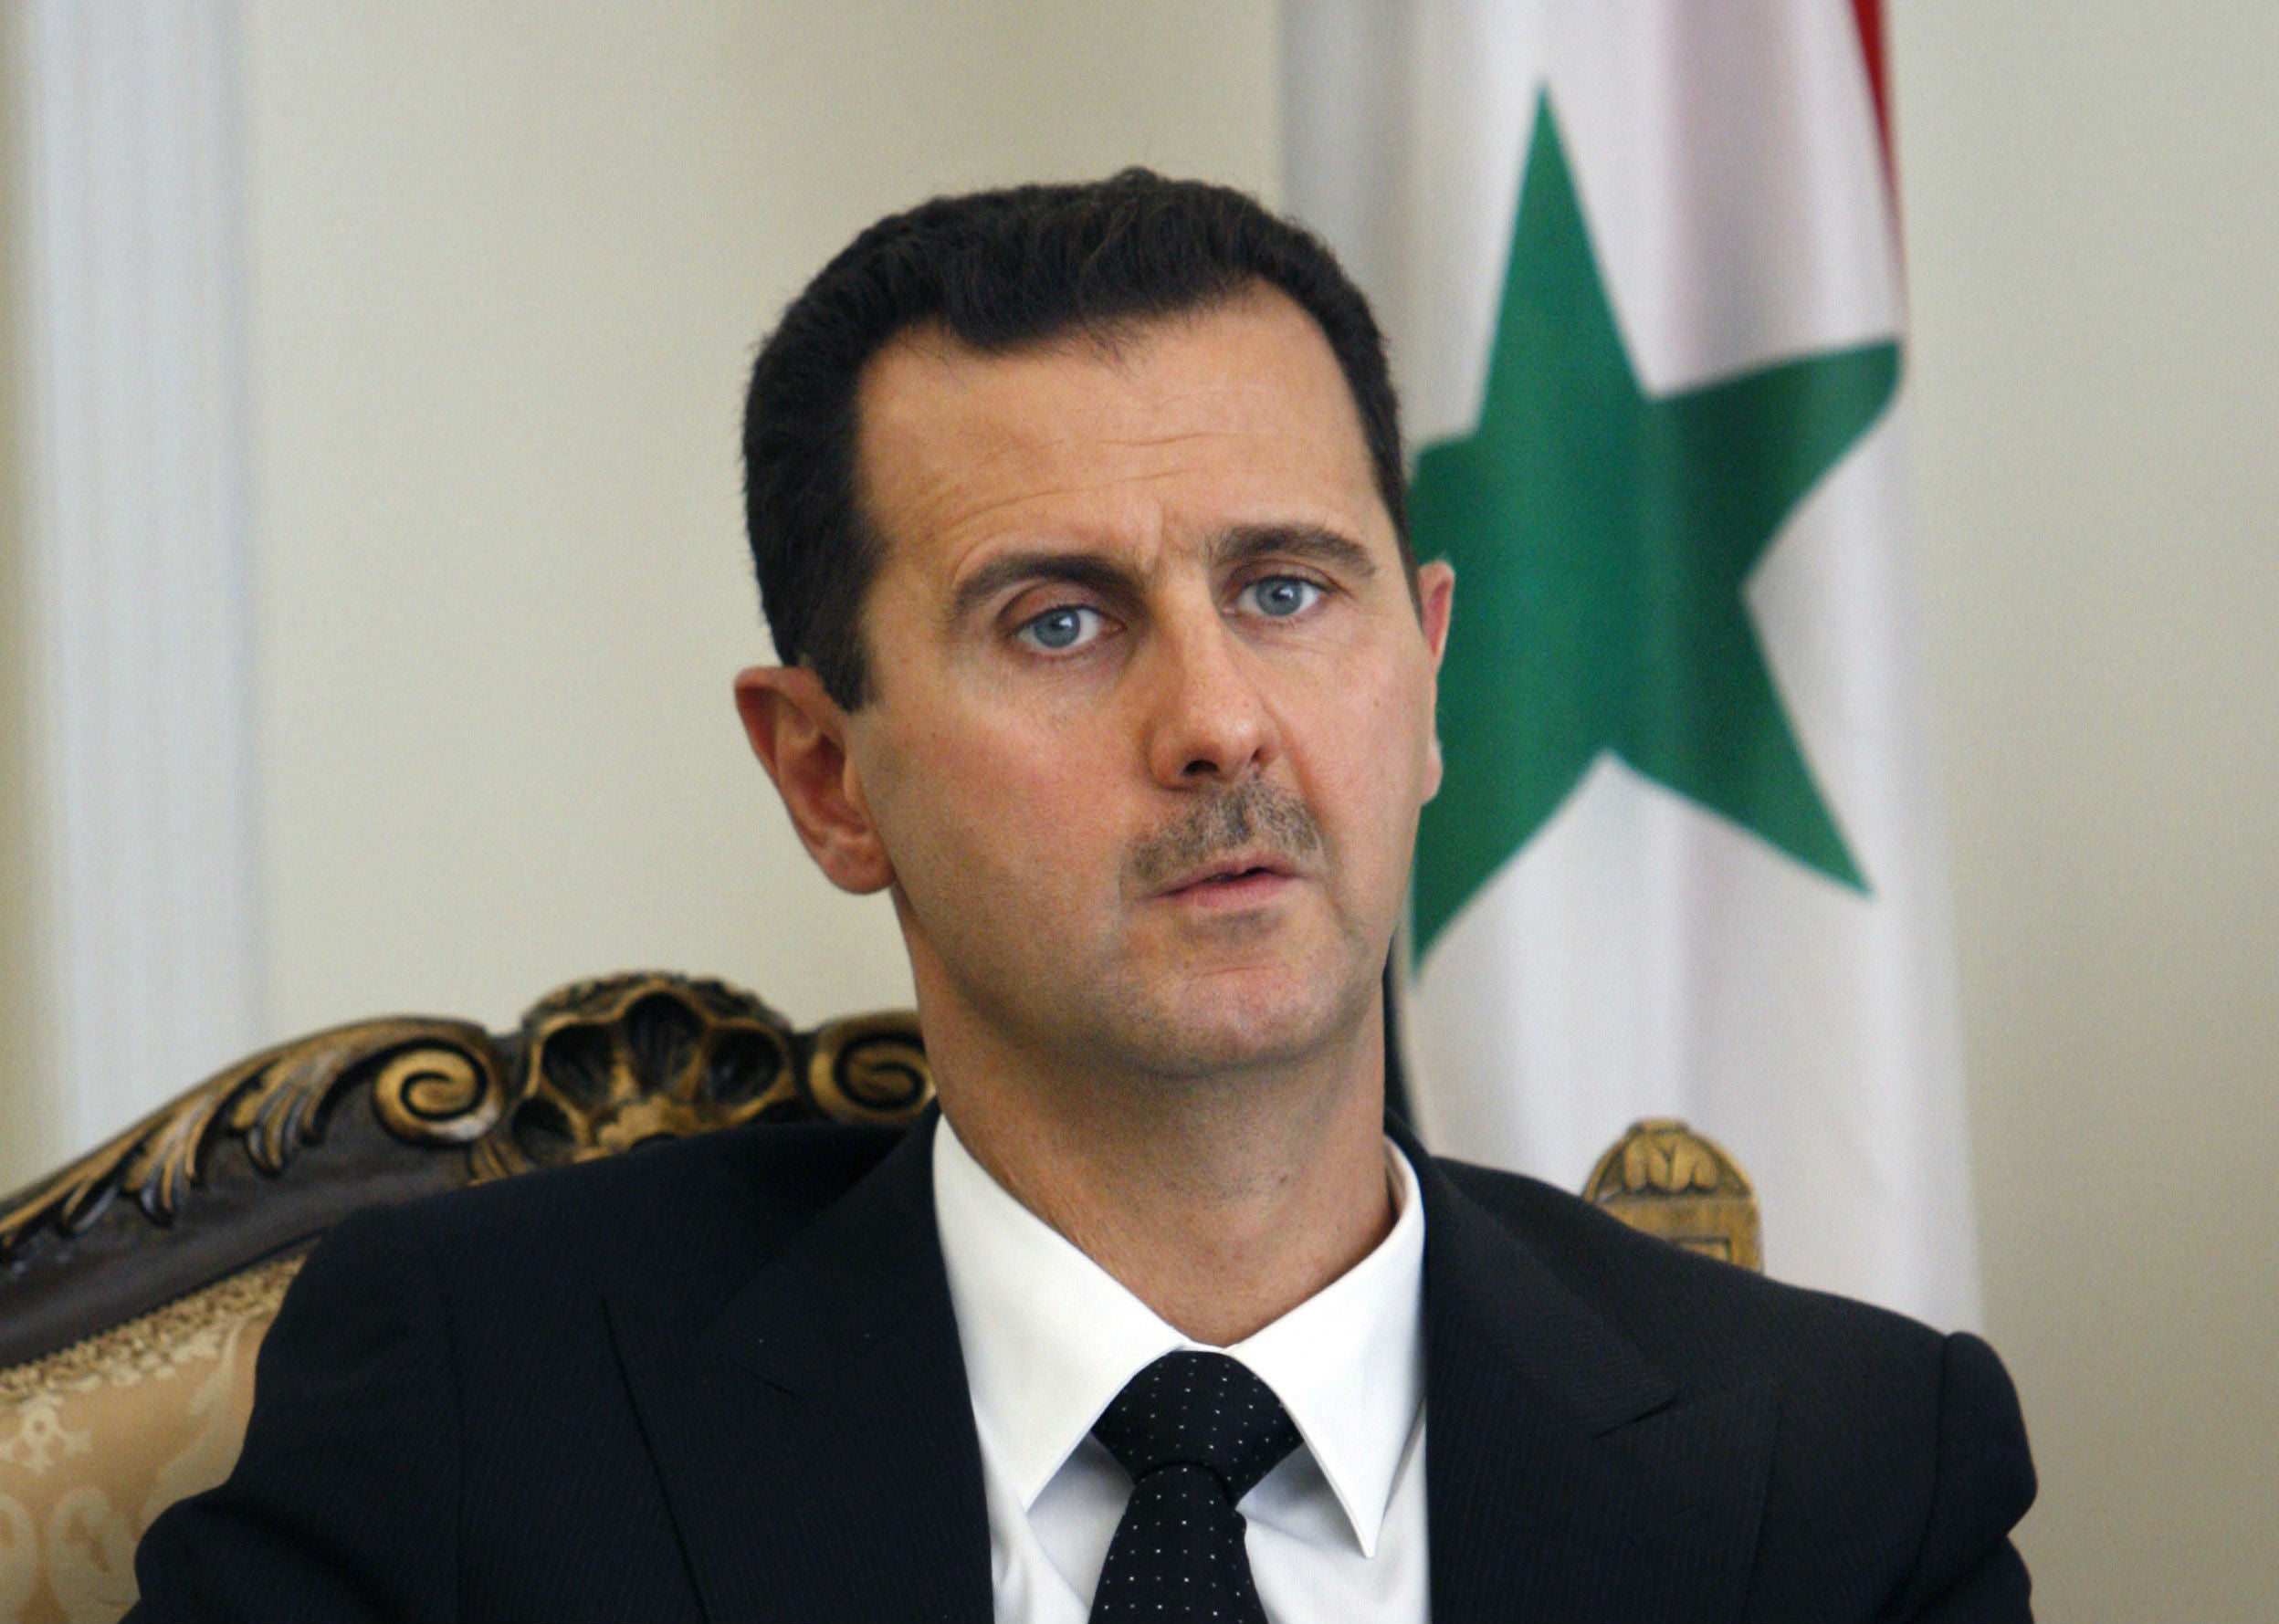 &#13;
Russia supports the government of Syrian leader Bashar al-Assad &#13;